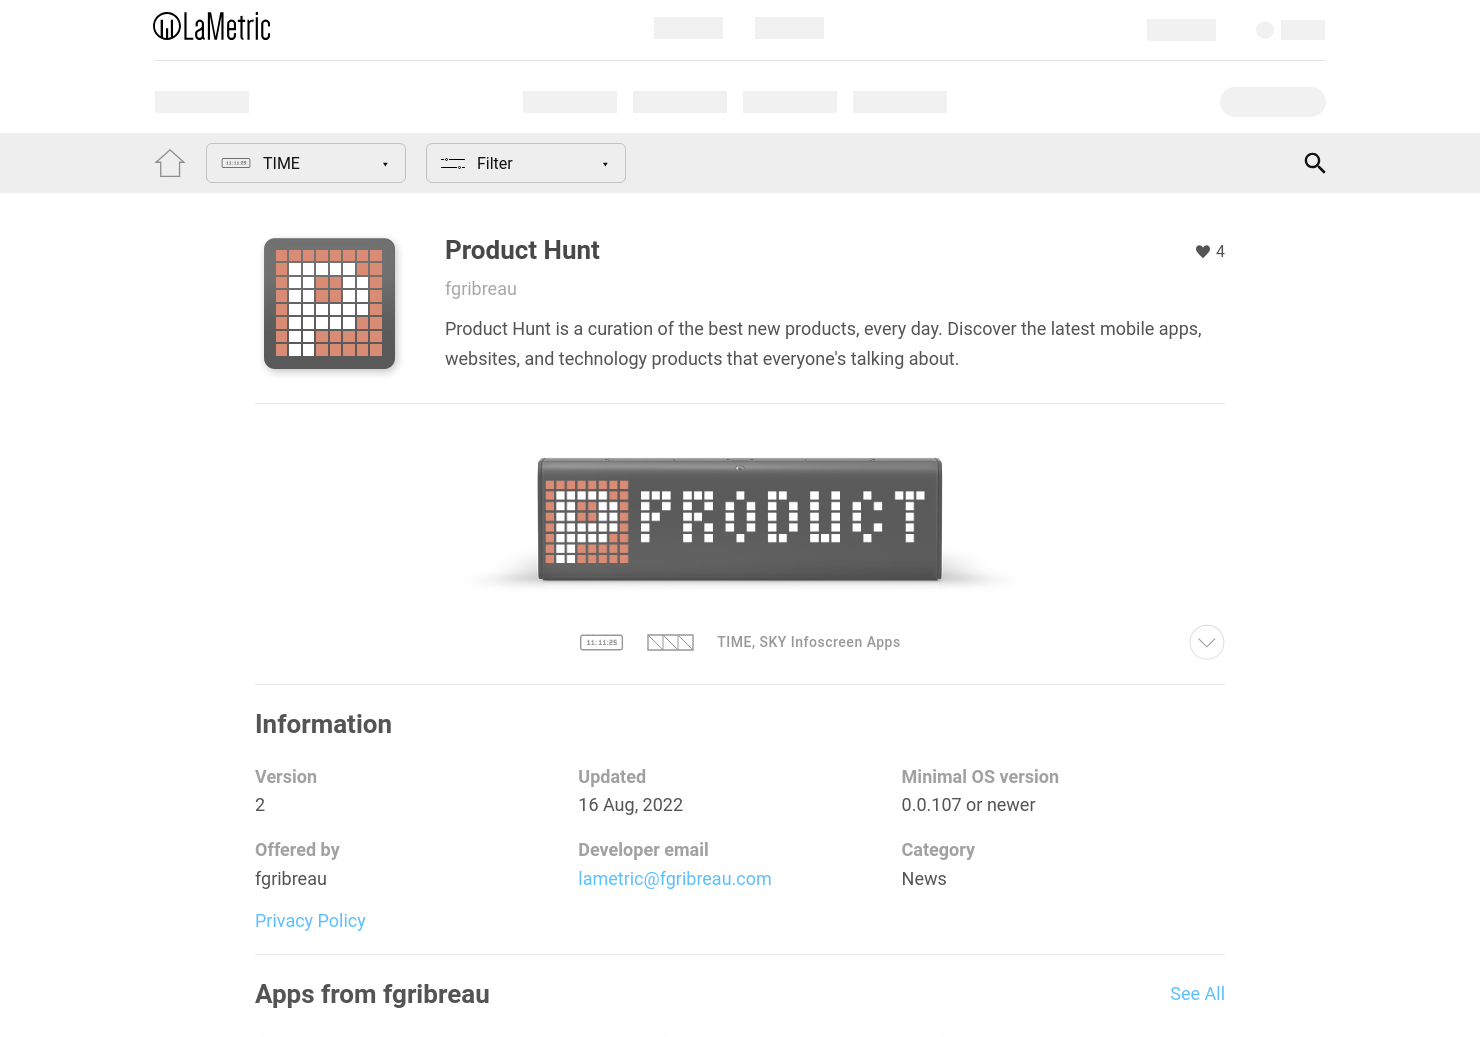 ProductHunt for LaMetric